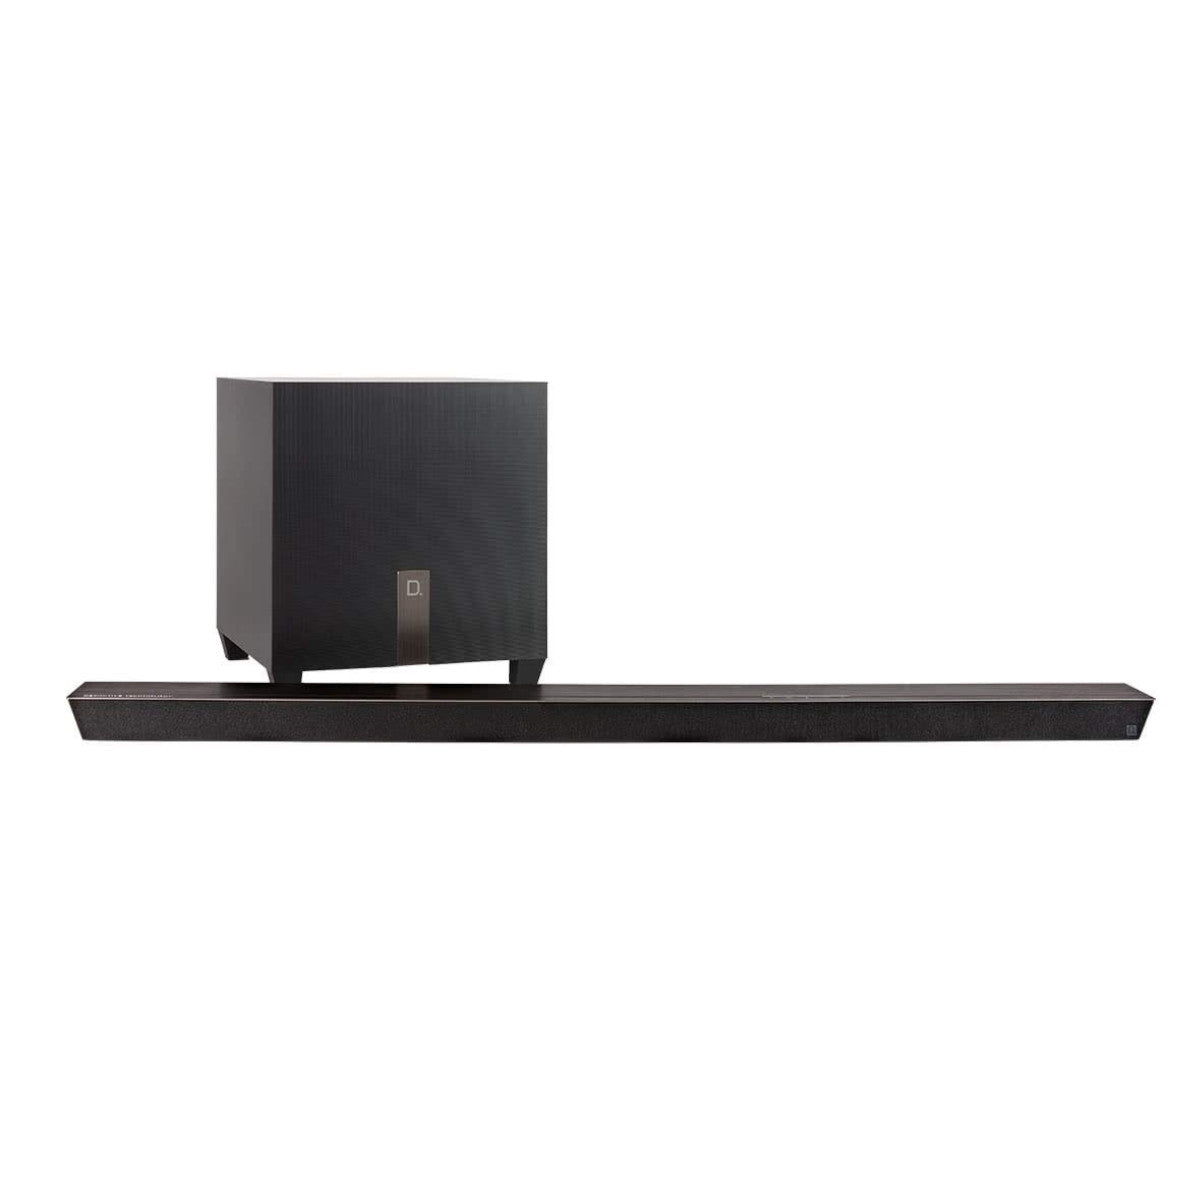 Definitive Technology Studio Slim 3.1 Channel Sound Bar with Chromecast Built-in - Ooberpad India